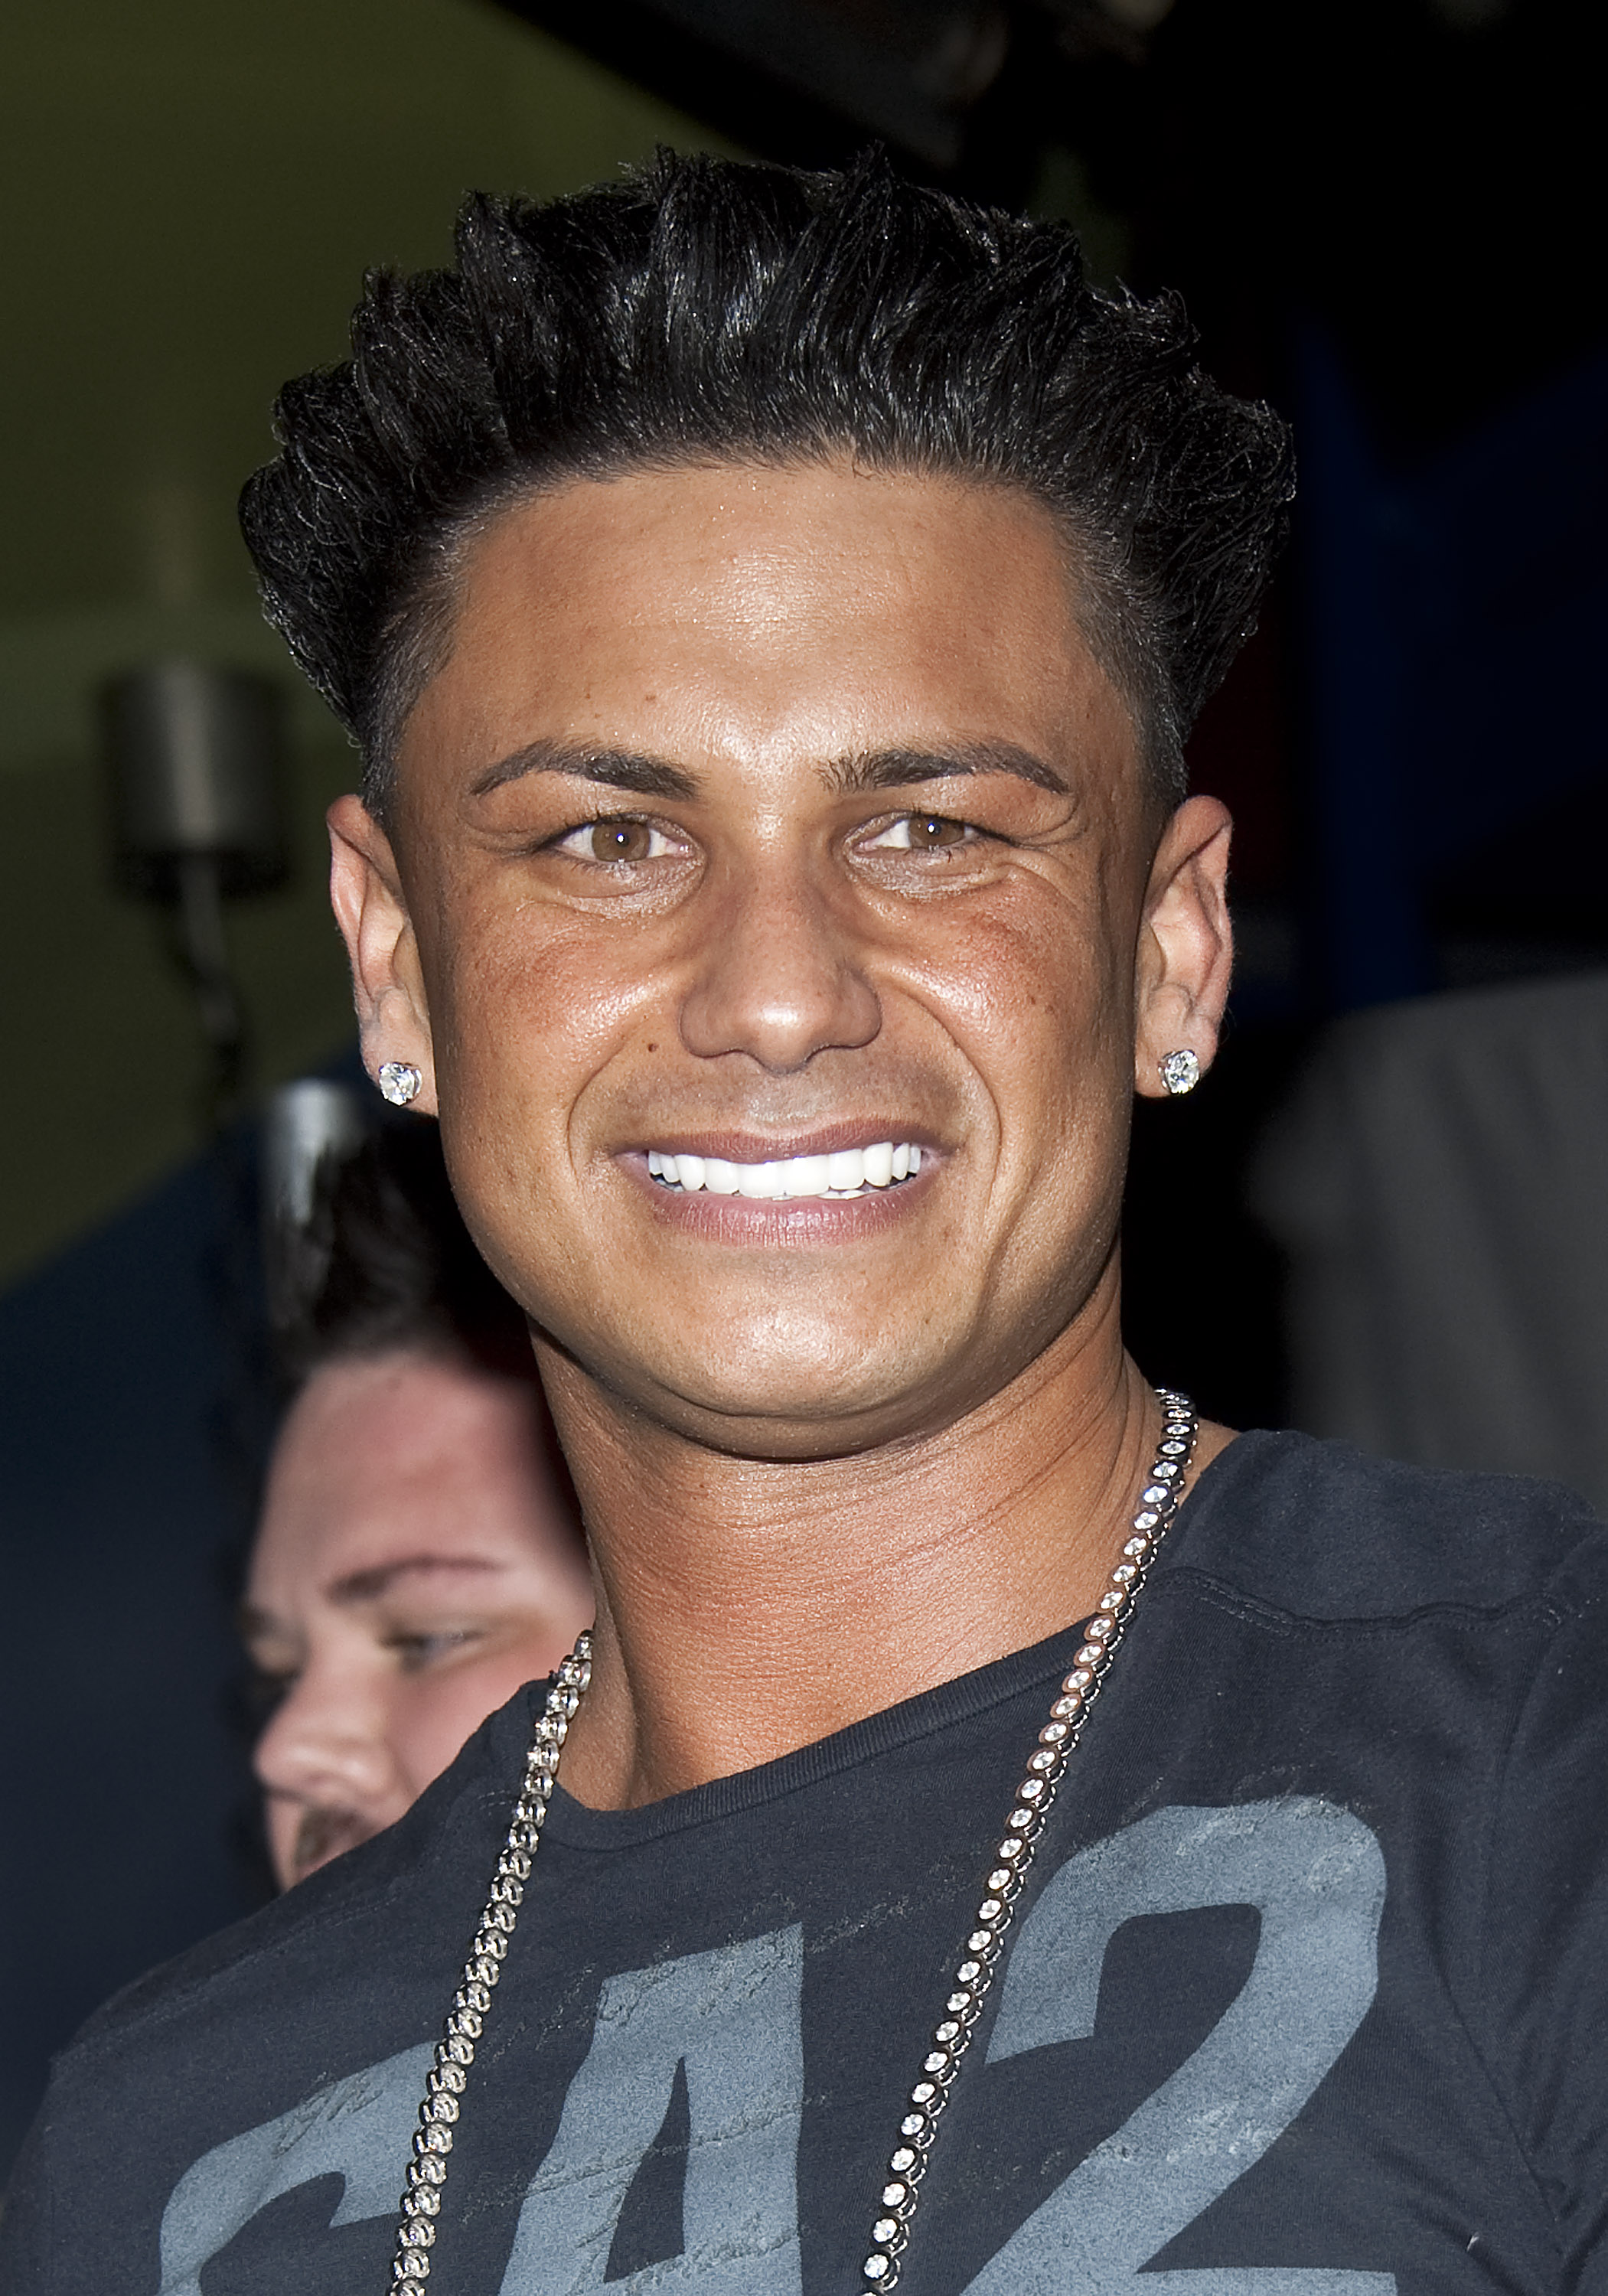 pauly d before and after steroids